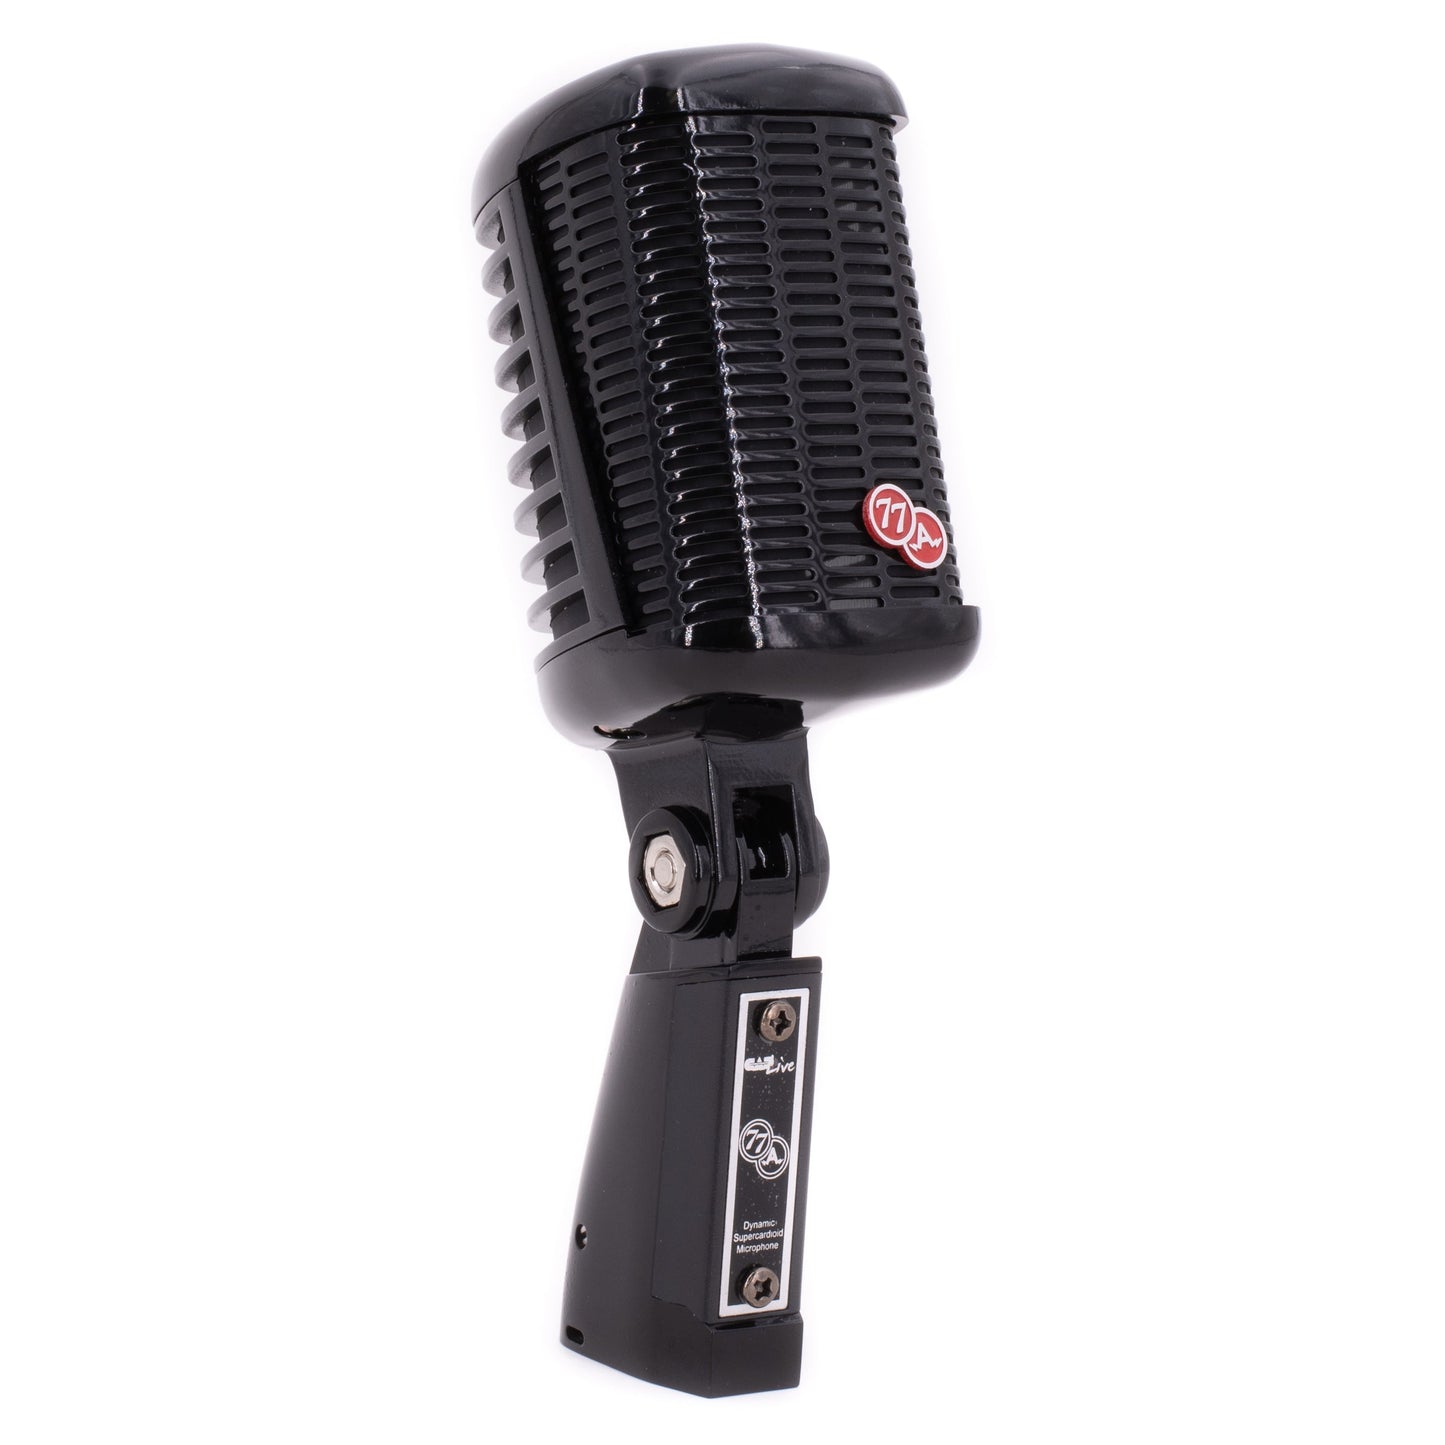 CAD Live A77 Supercardioid Large Diaphragm Dynamic Side Address Microphone - Gloss Black - maplin.co.uk